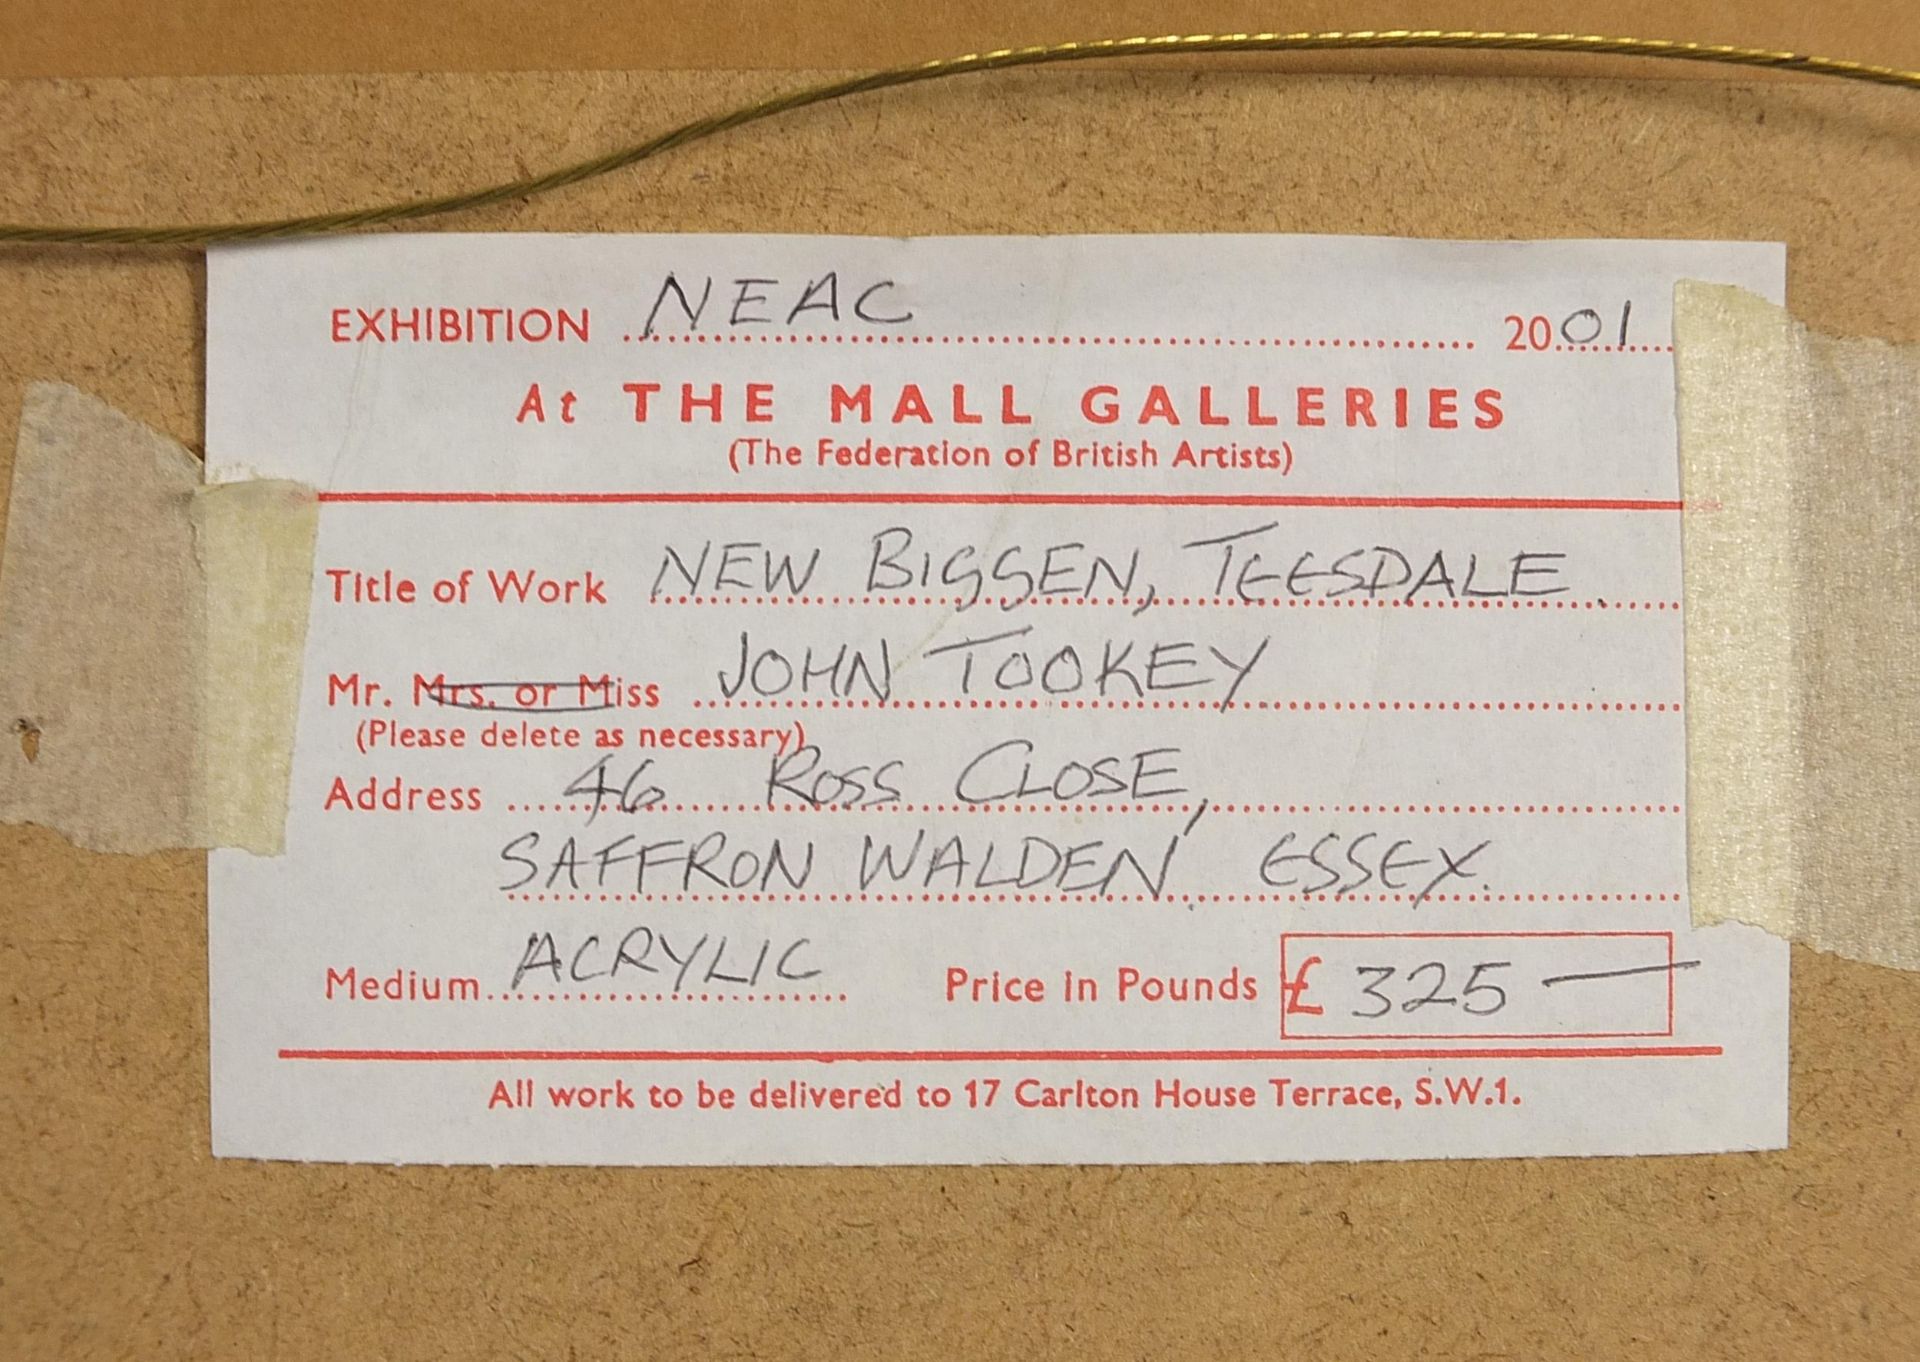 John Tookey - New Biggen, Teesdale, signed acrylic, At the Mall Galleries Exhibition label verso, - Image 5 of 5